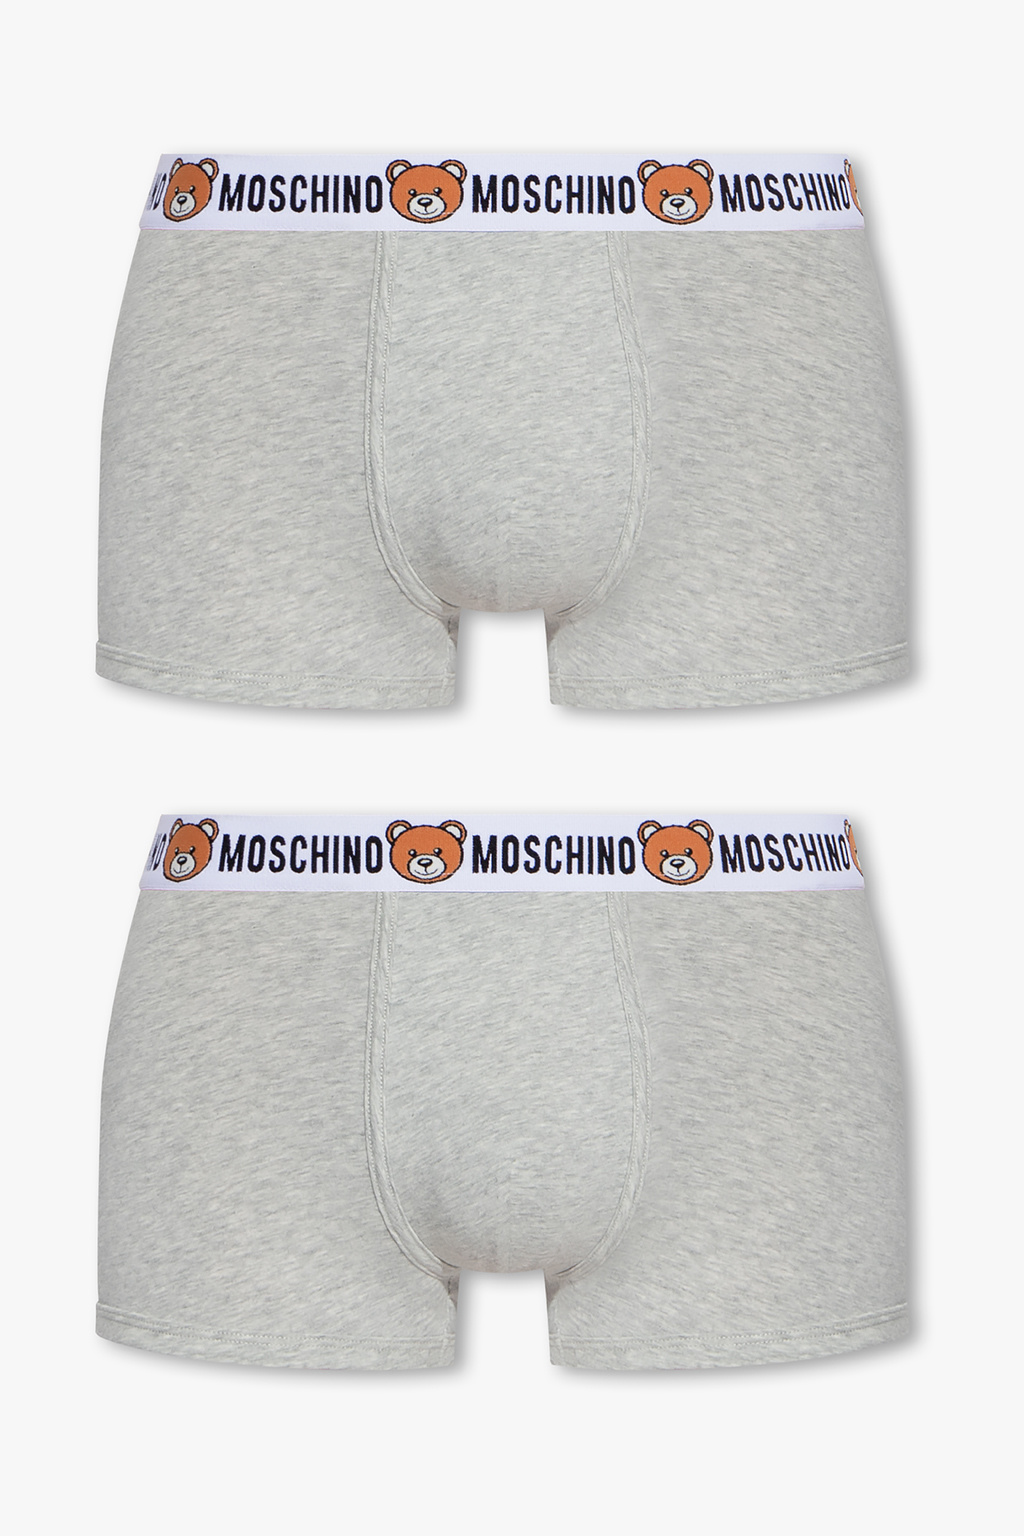 Moschino Boxers 2-pack, Men's Clothing